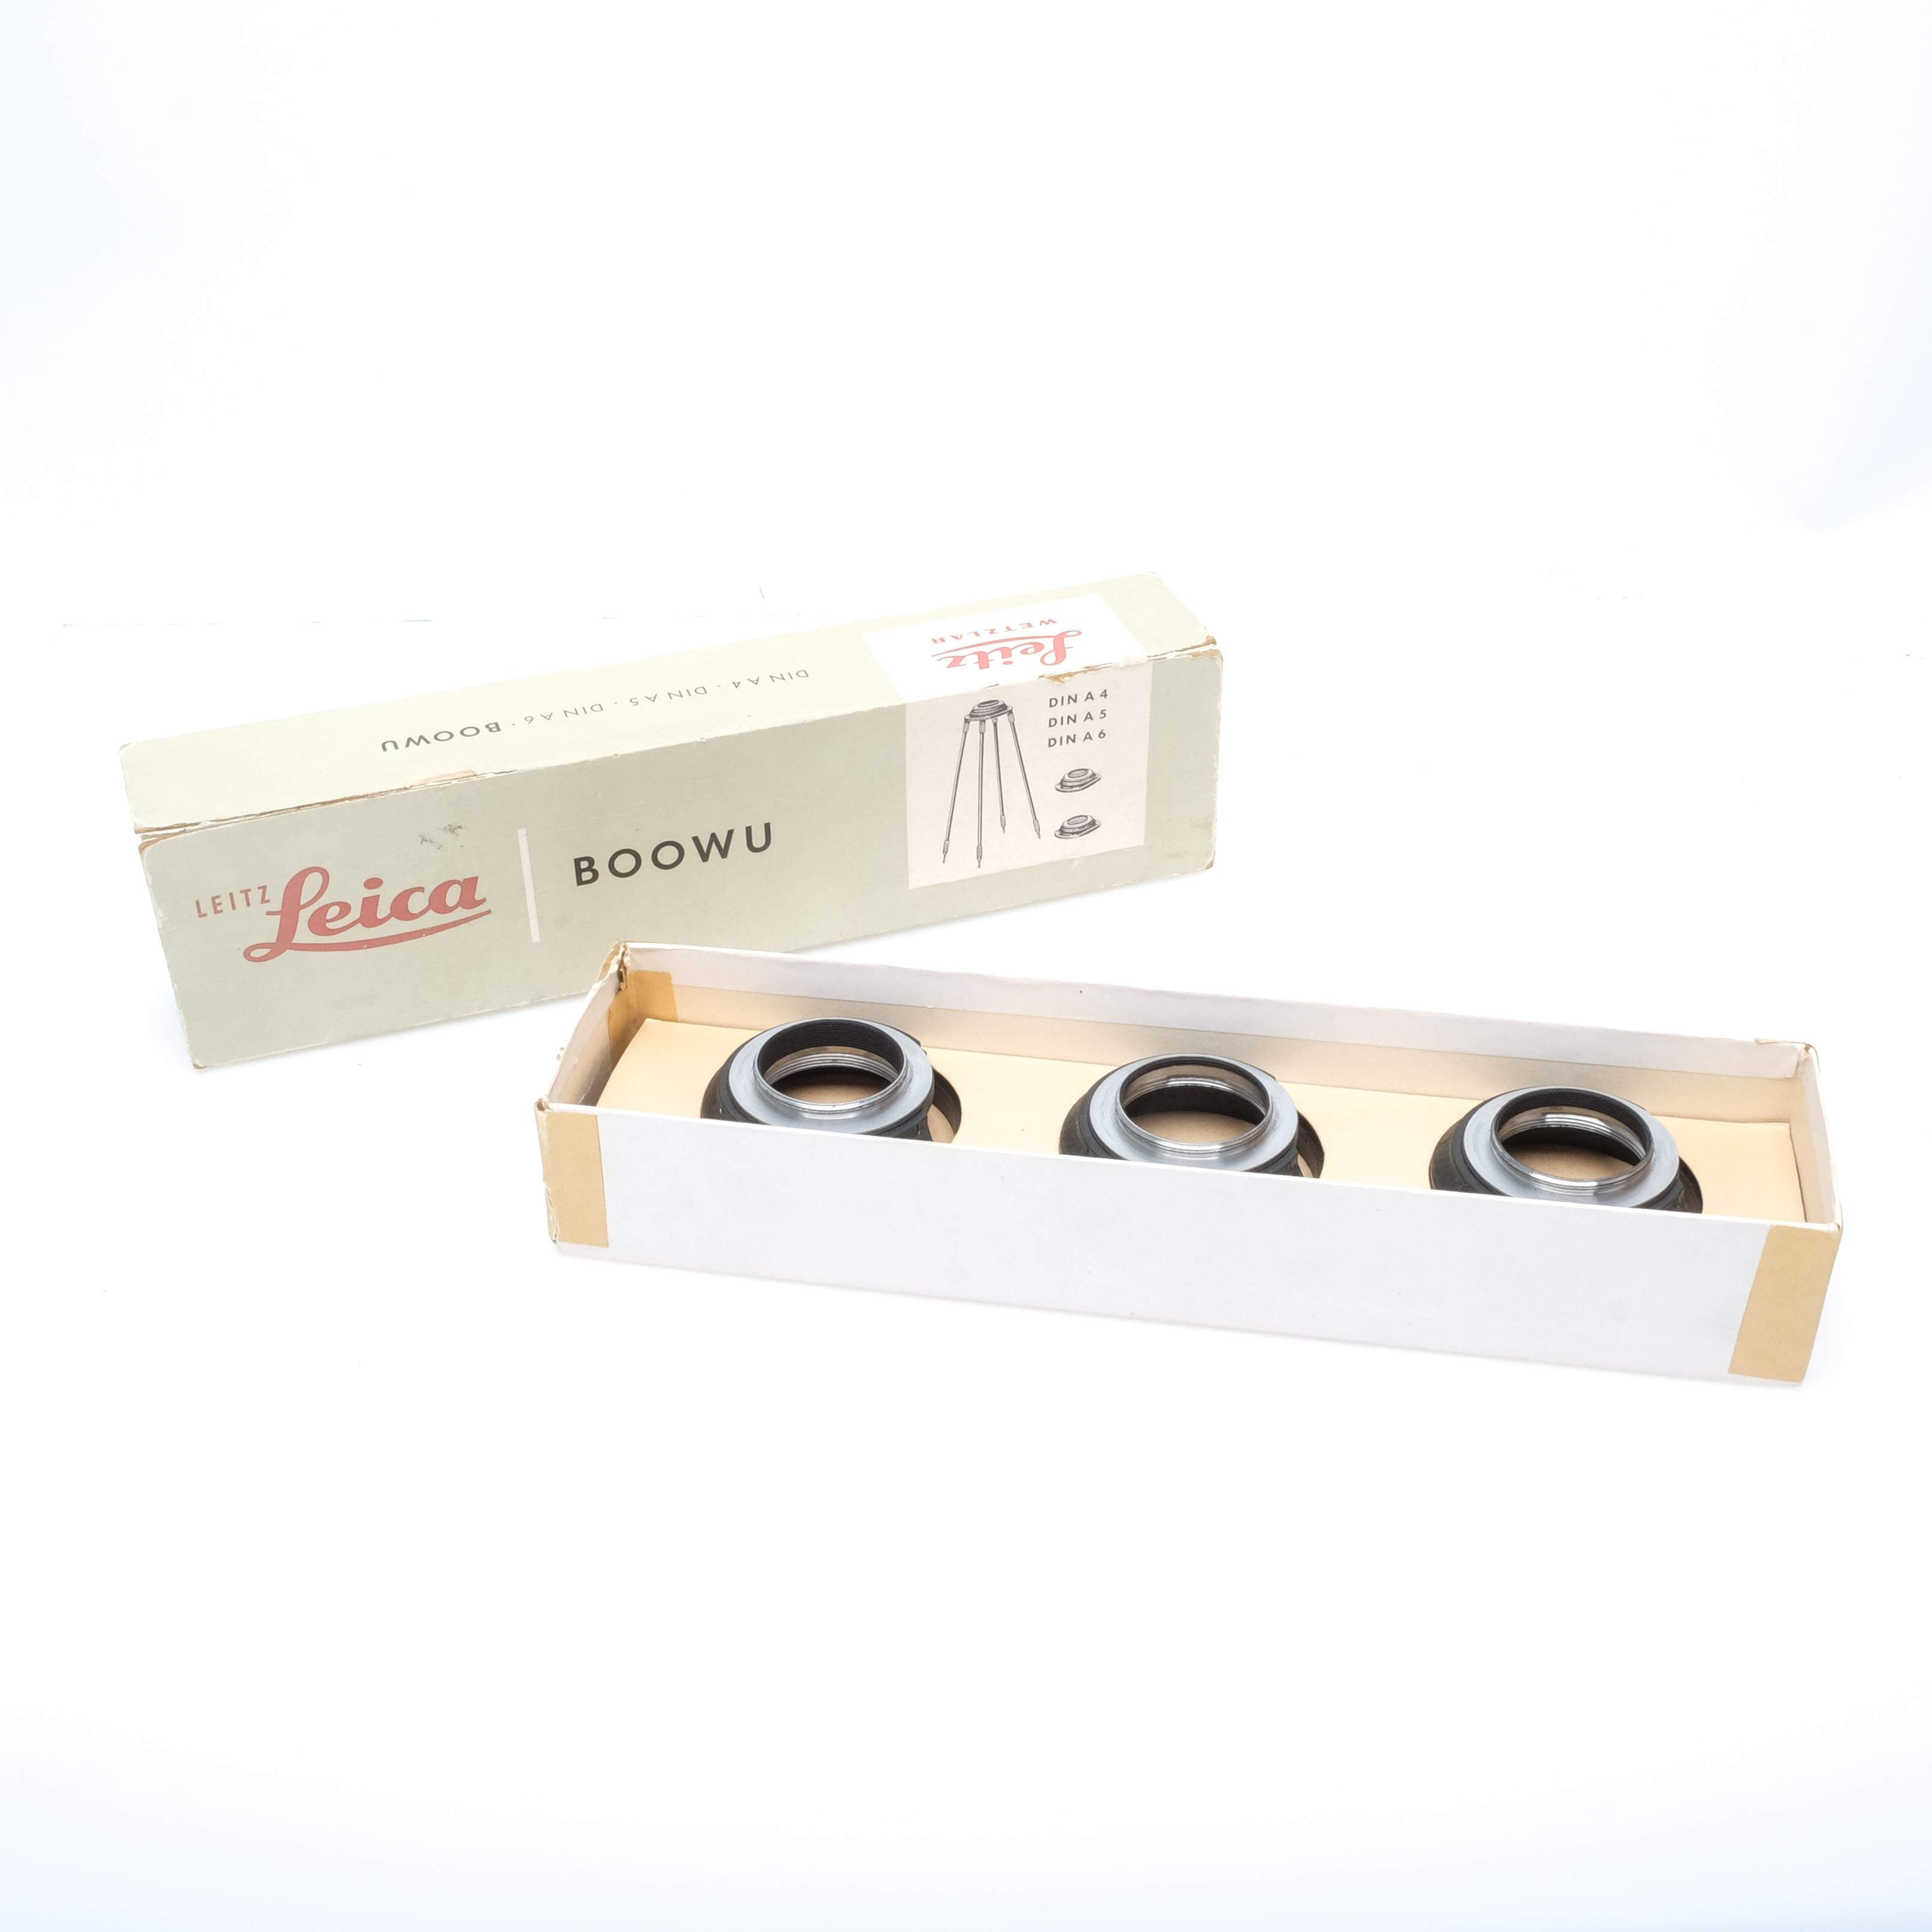 Leica BOOWU Copy Stand, Boxed (9+)